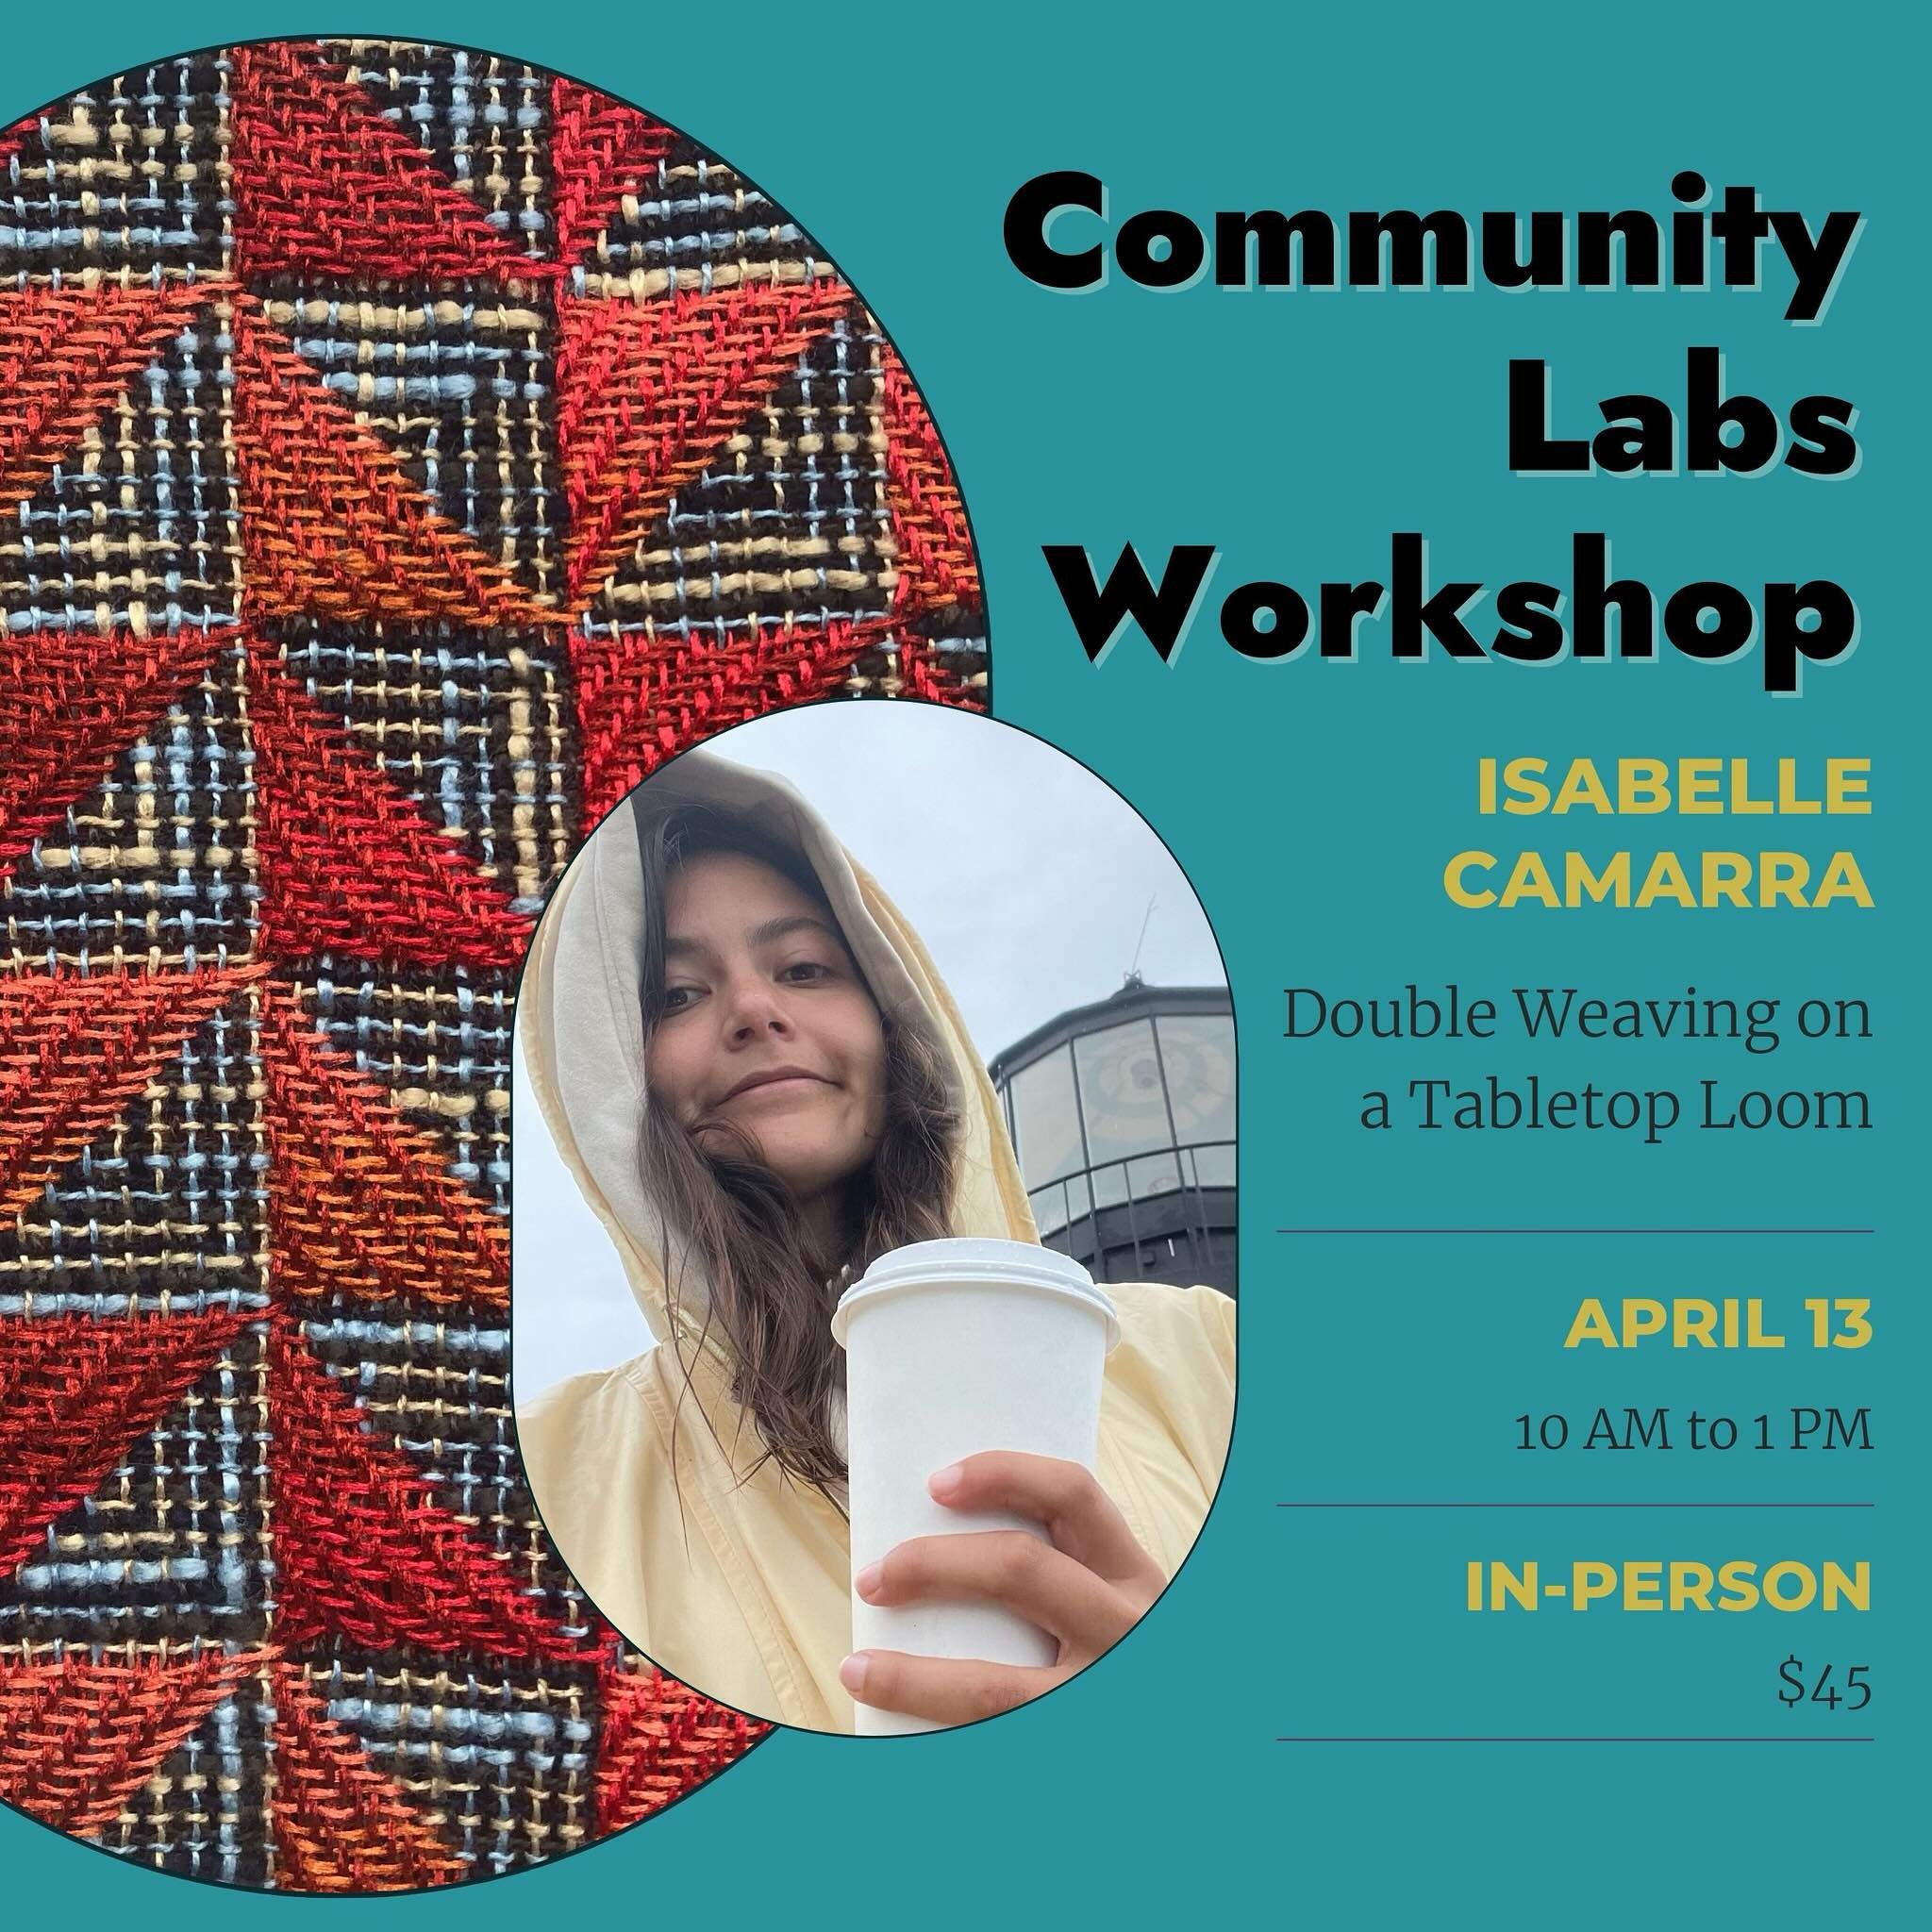 Does double weaving mean double fun? We think so!

Artist Isabelle Camarra makes this doubly-cool weaving technique super accessible in her Double Weaving on a Tabletop Loom Community Labs Workshop.

The workshop will introduce participants to double